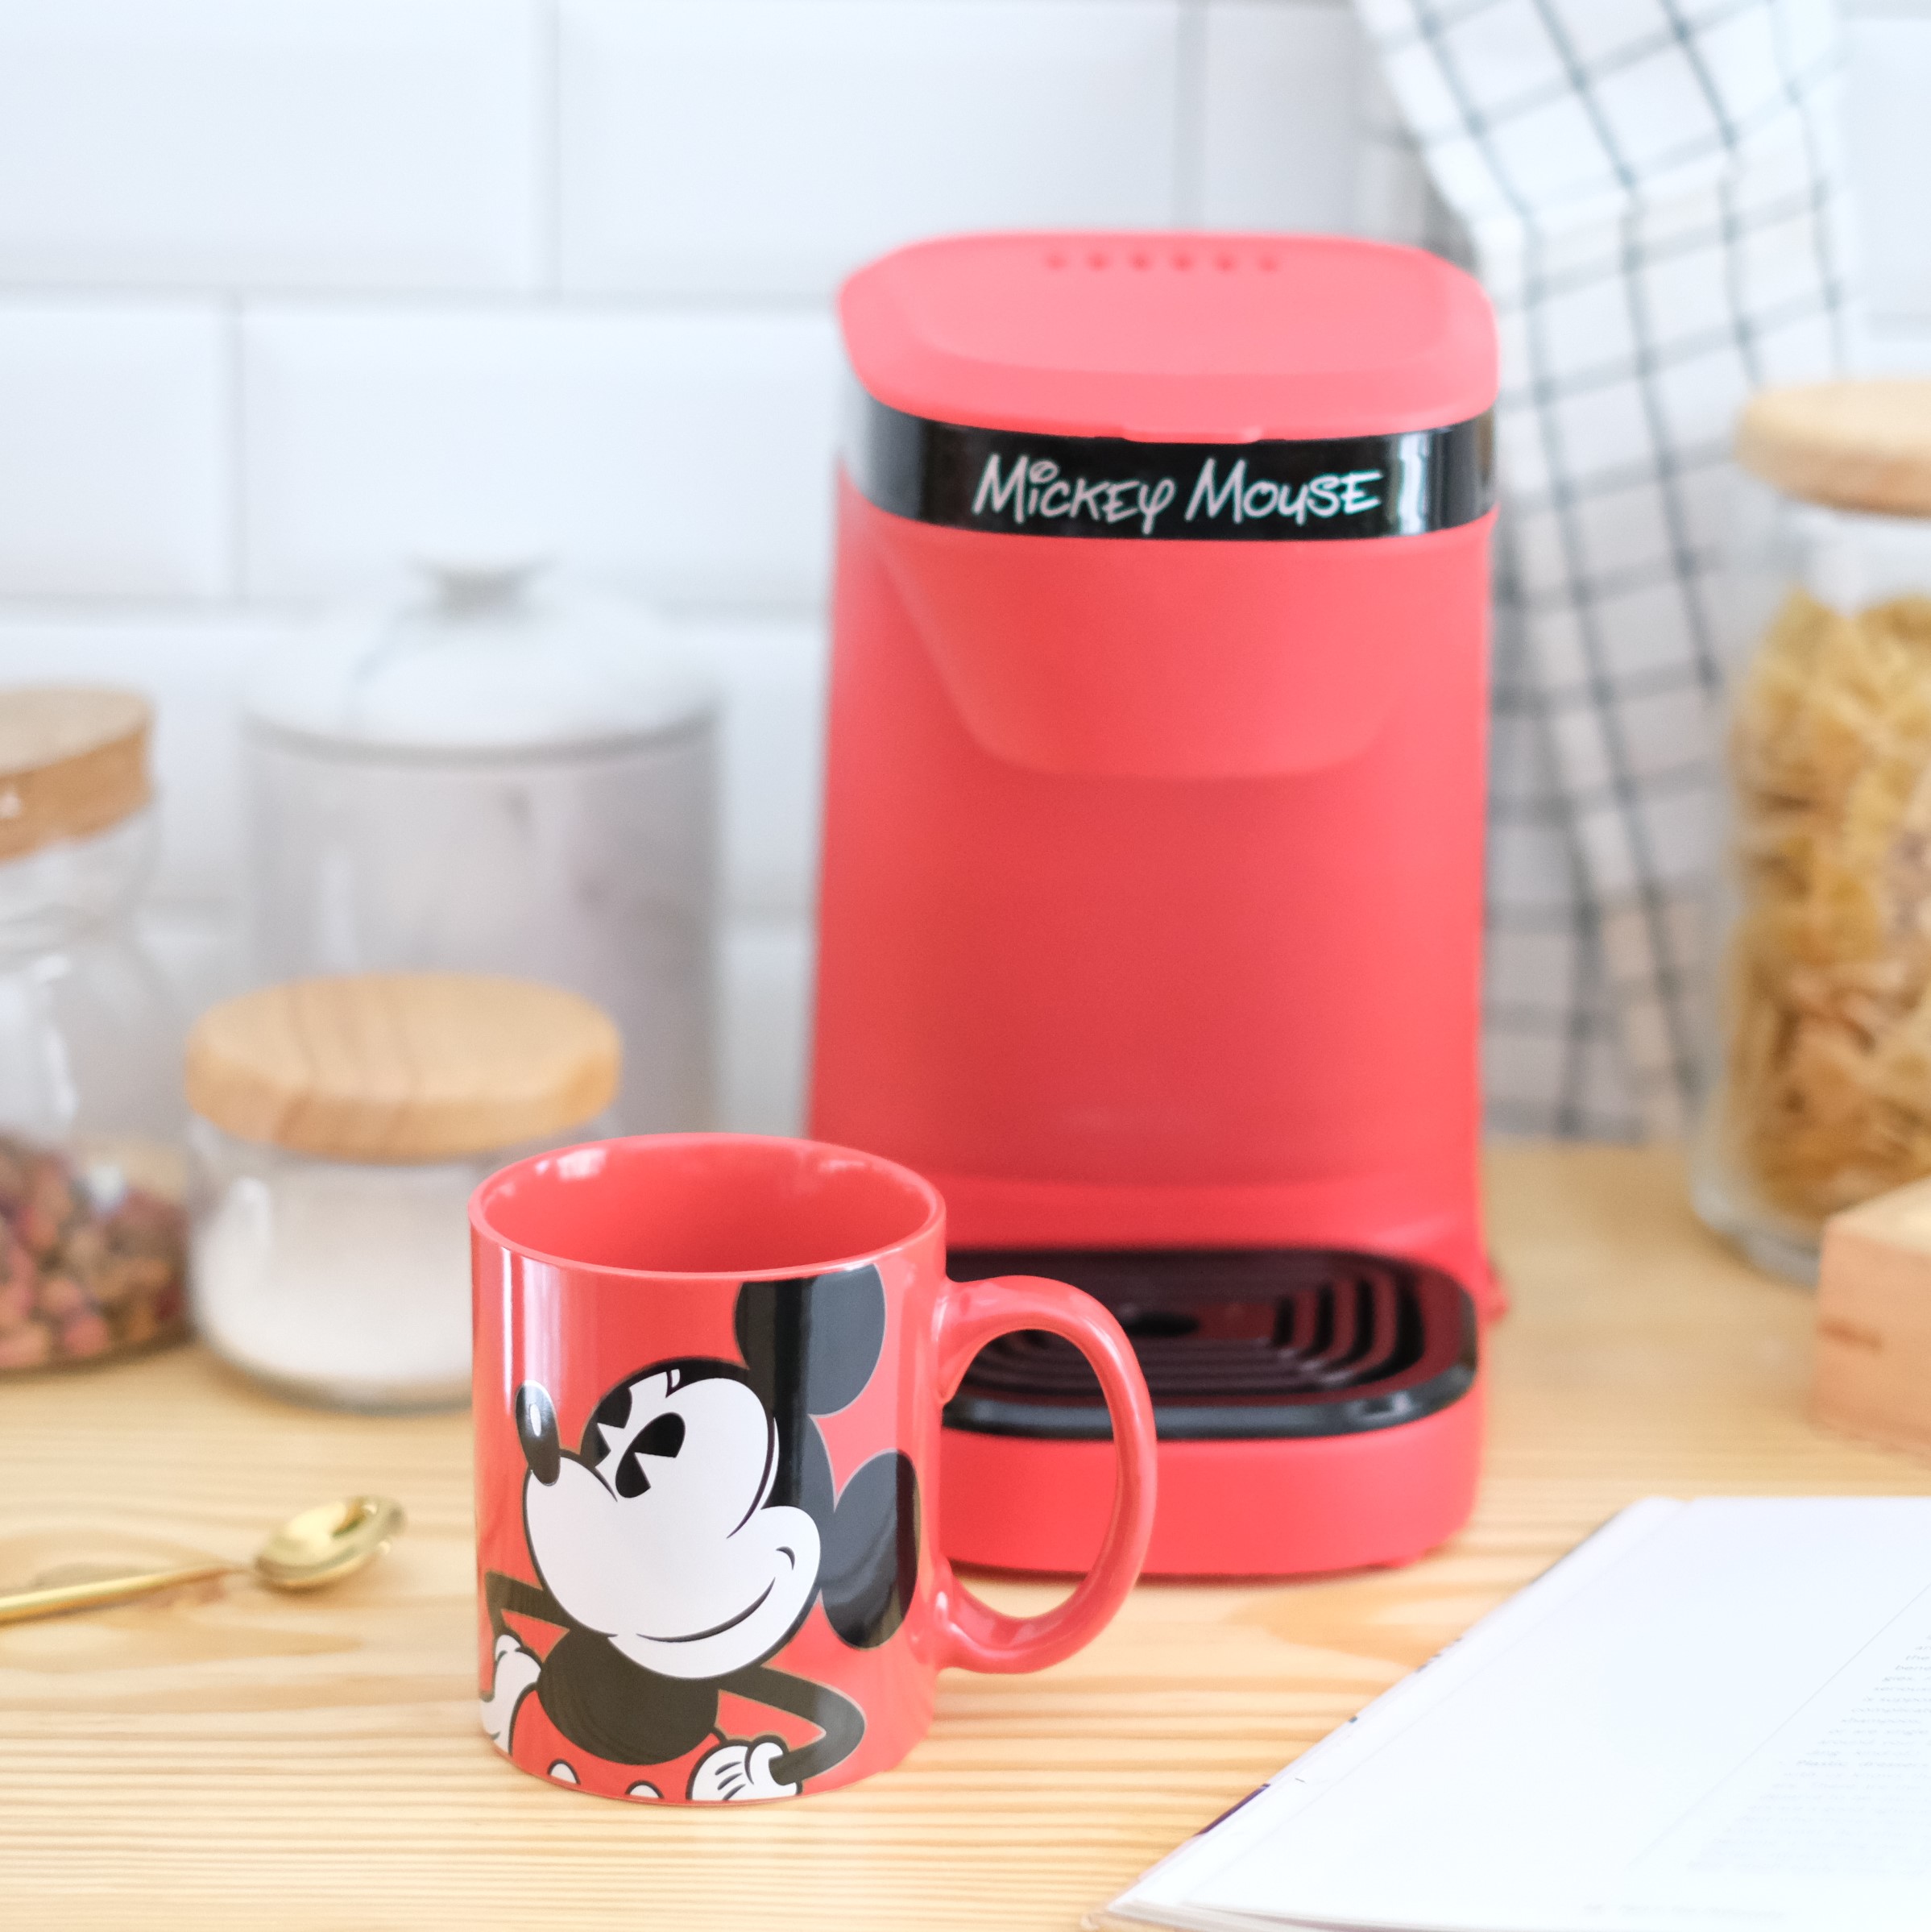 Mickey Mouse Personal Coffee Maker